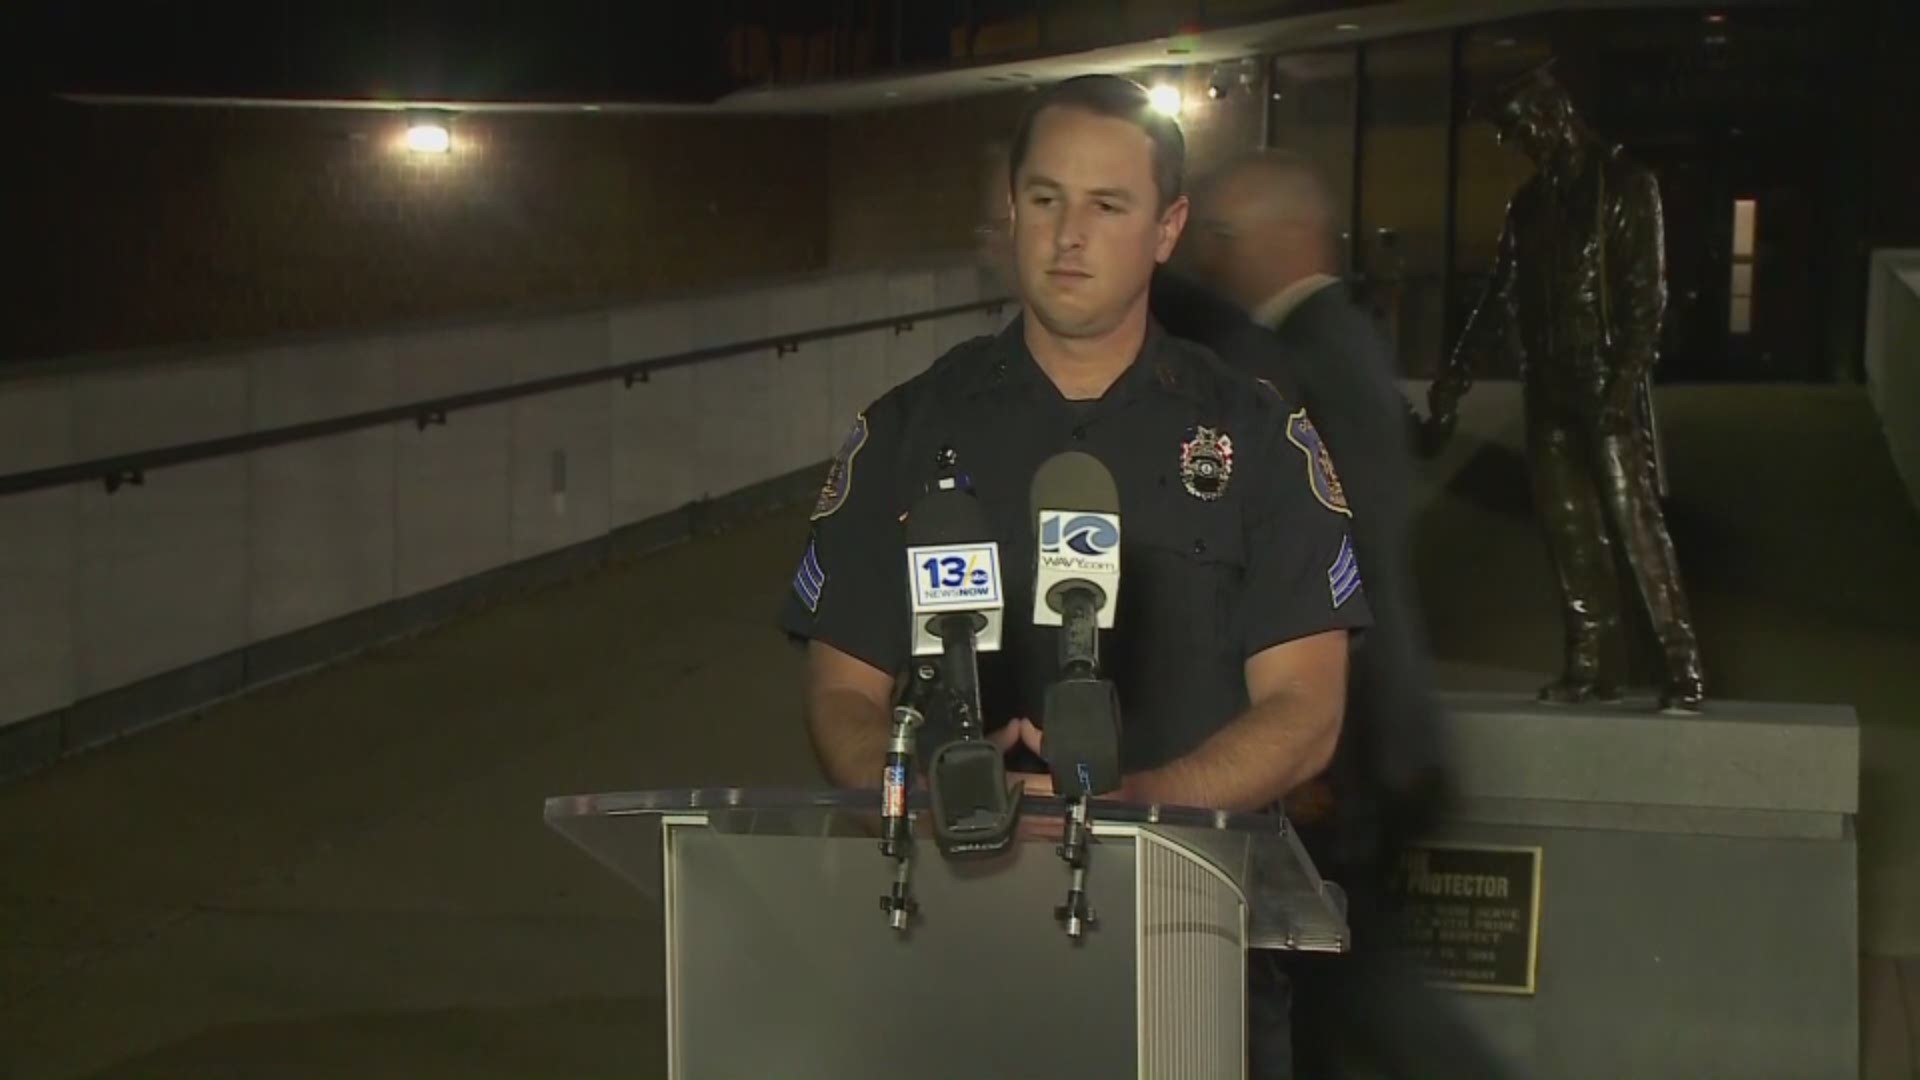 Hampton Police Chief Terry Sult updated the public on missing two-year-old Noah Tomlin. Police arrested Noah's mother, Julia Tomlin, in connection with the toddler's disappearance. Police say, "We believe him to be deceased."